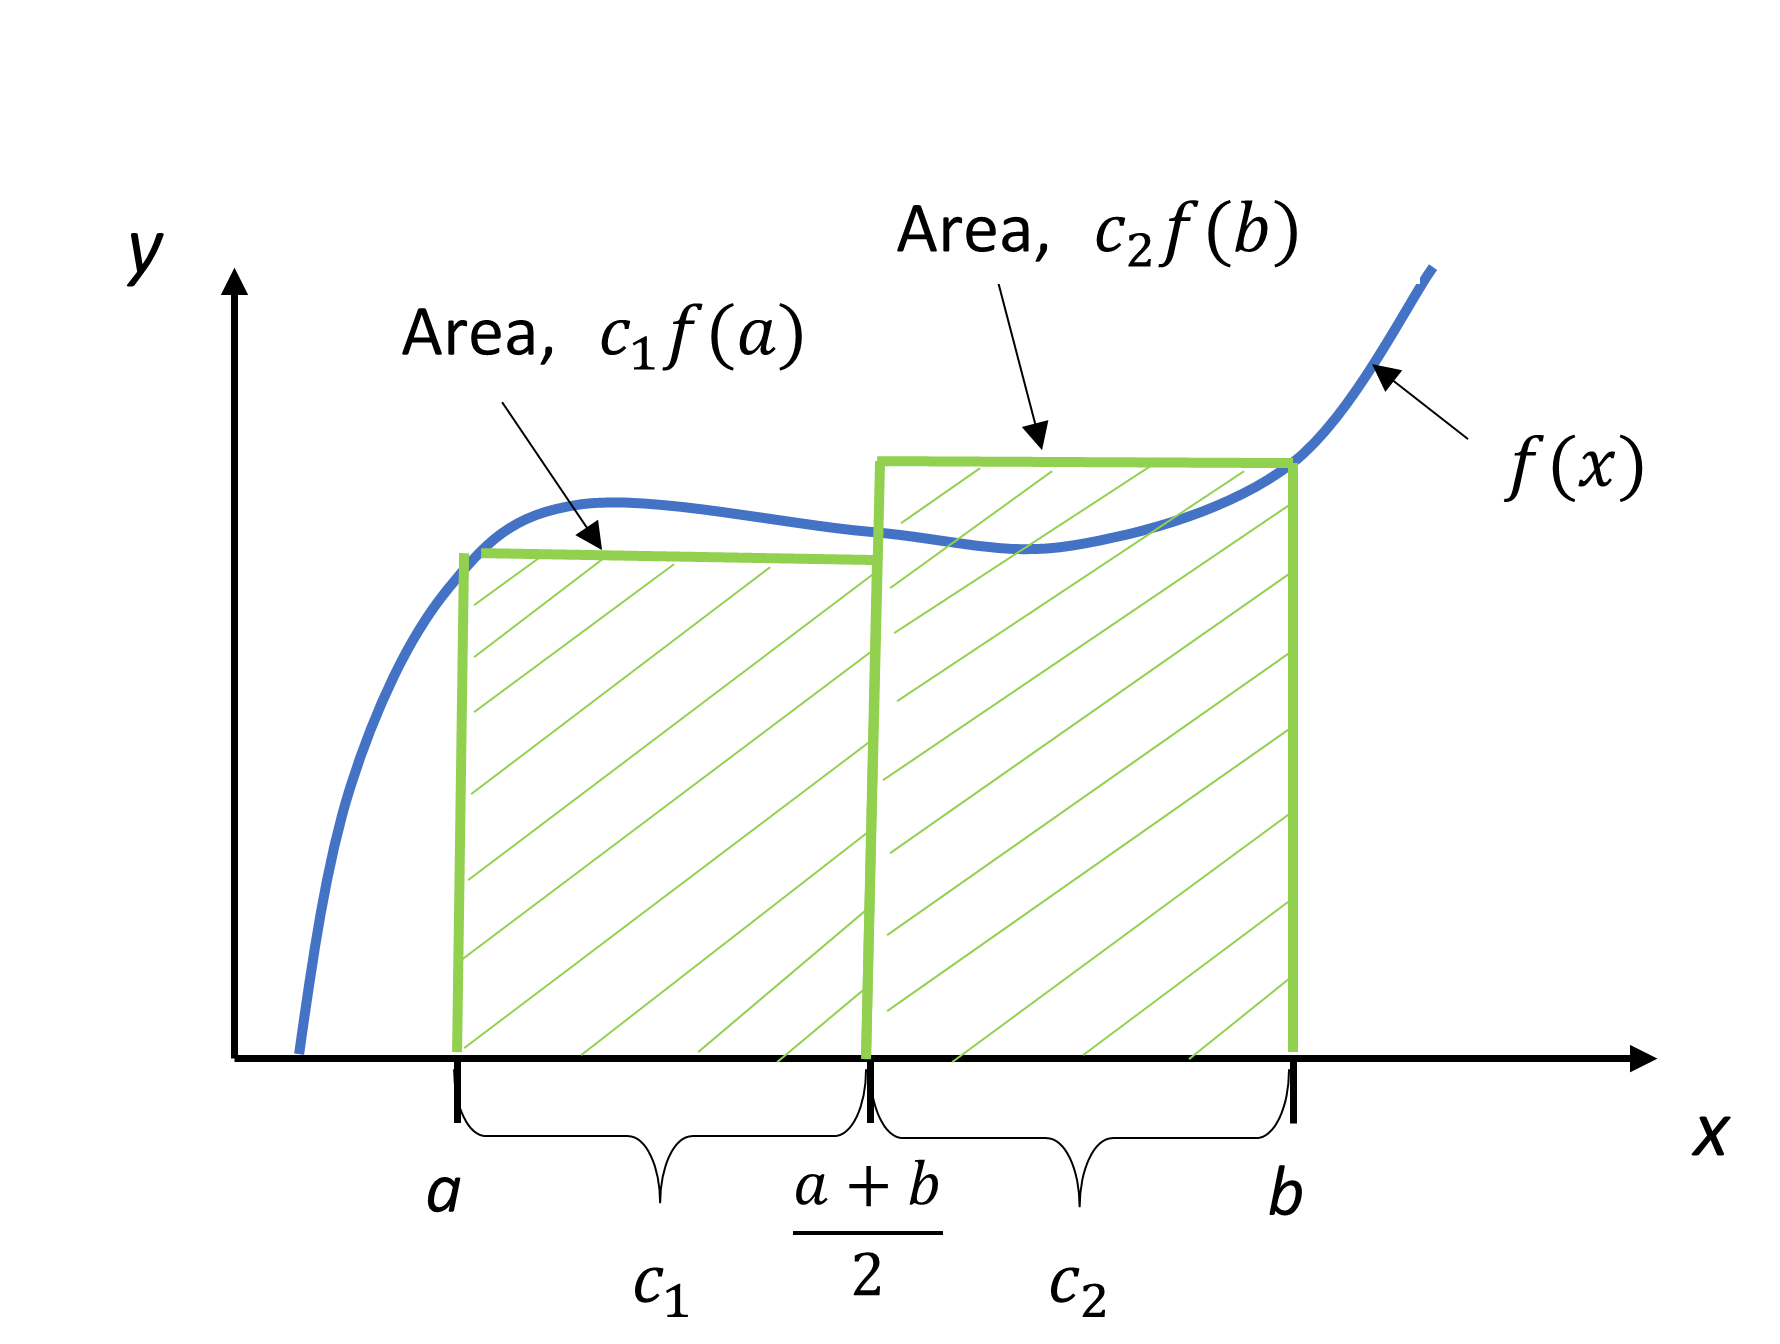 Approximating the area under a curve between points (a, f(a)) and (b, f(b)) as two rectangles, with the width of each equal to half the distance between a and b, the height of the left rectangle equal to f(a), and the height of the right rectangle equal to f(b).